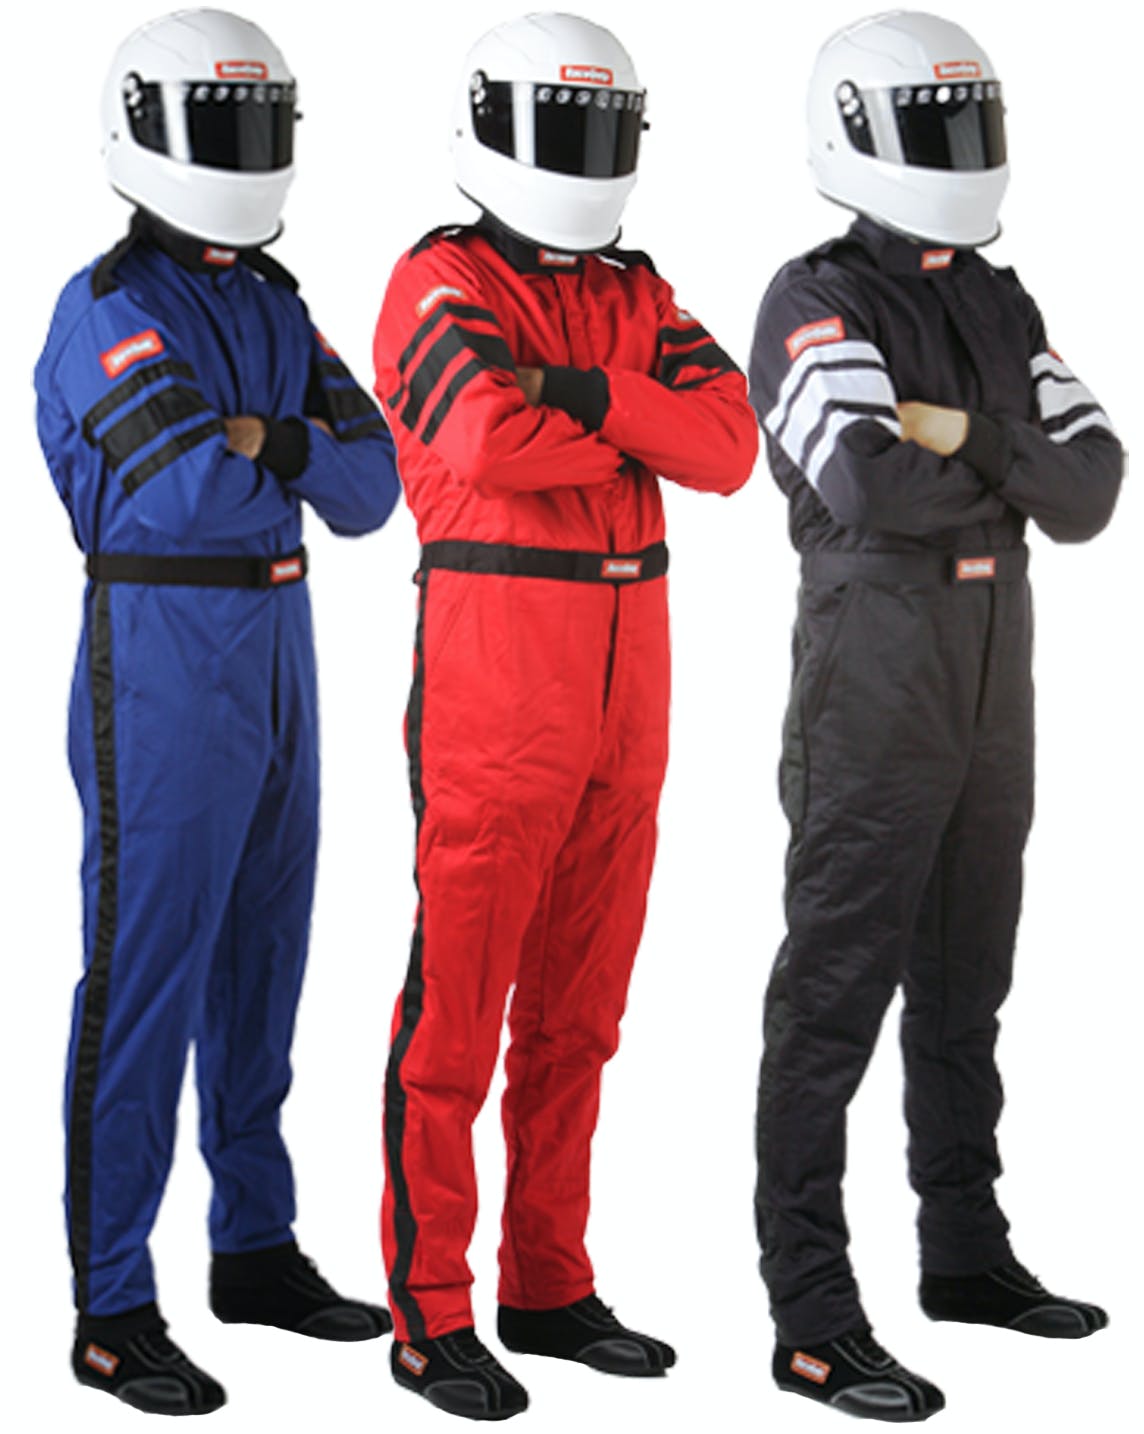 RaceQuip 120006 SFI-5 Pyrovatex One-Piece Multi-Layer Racing Fire Suit (Black, X-Large)